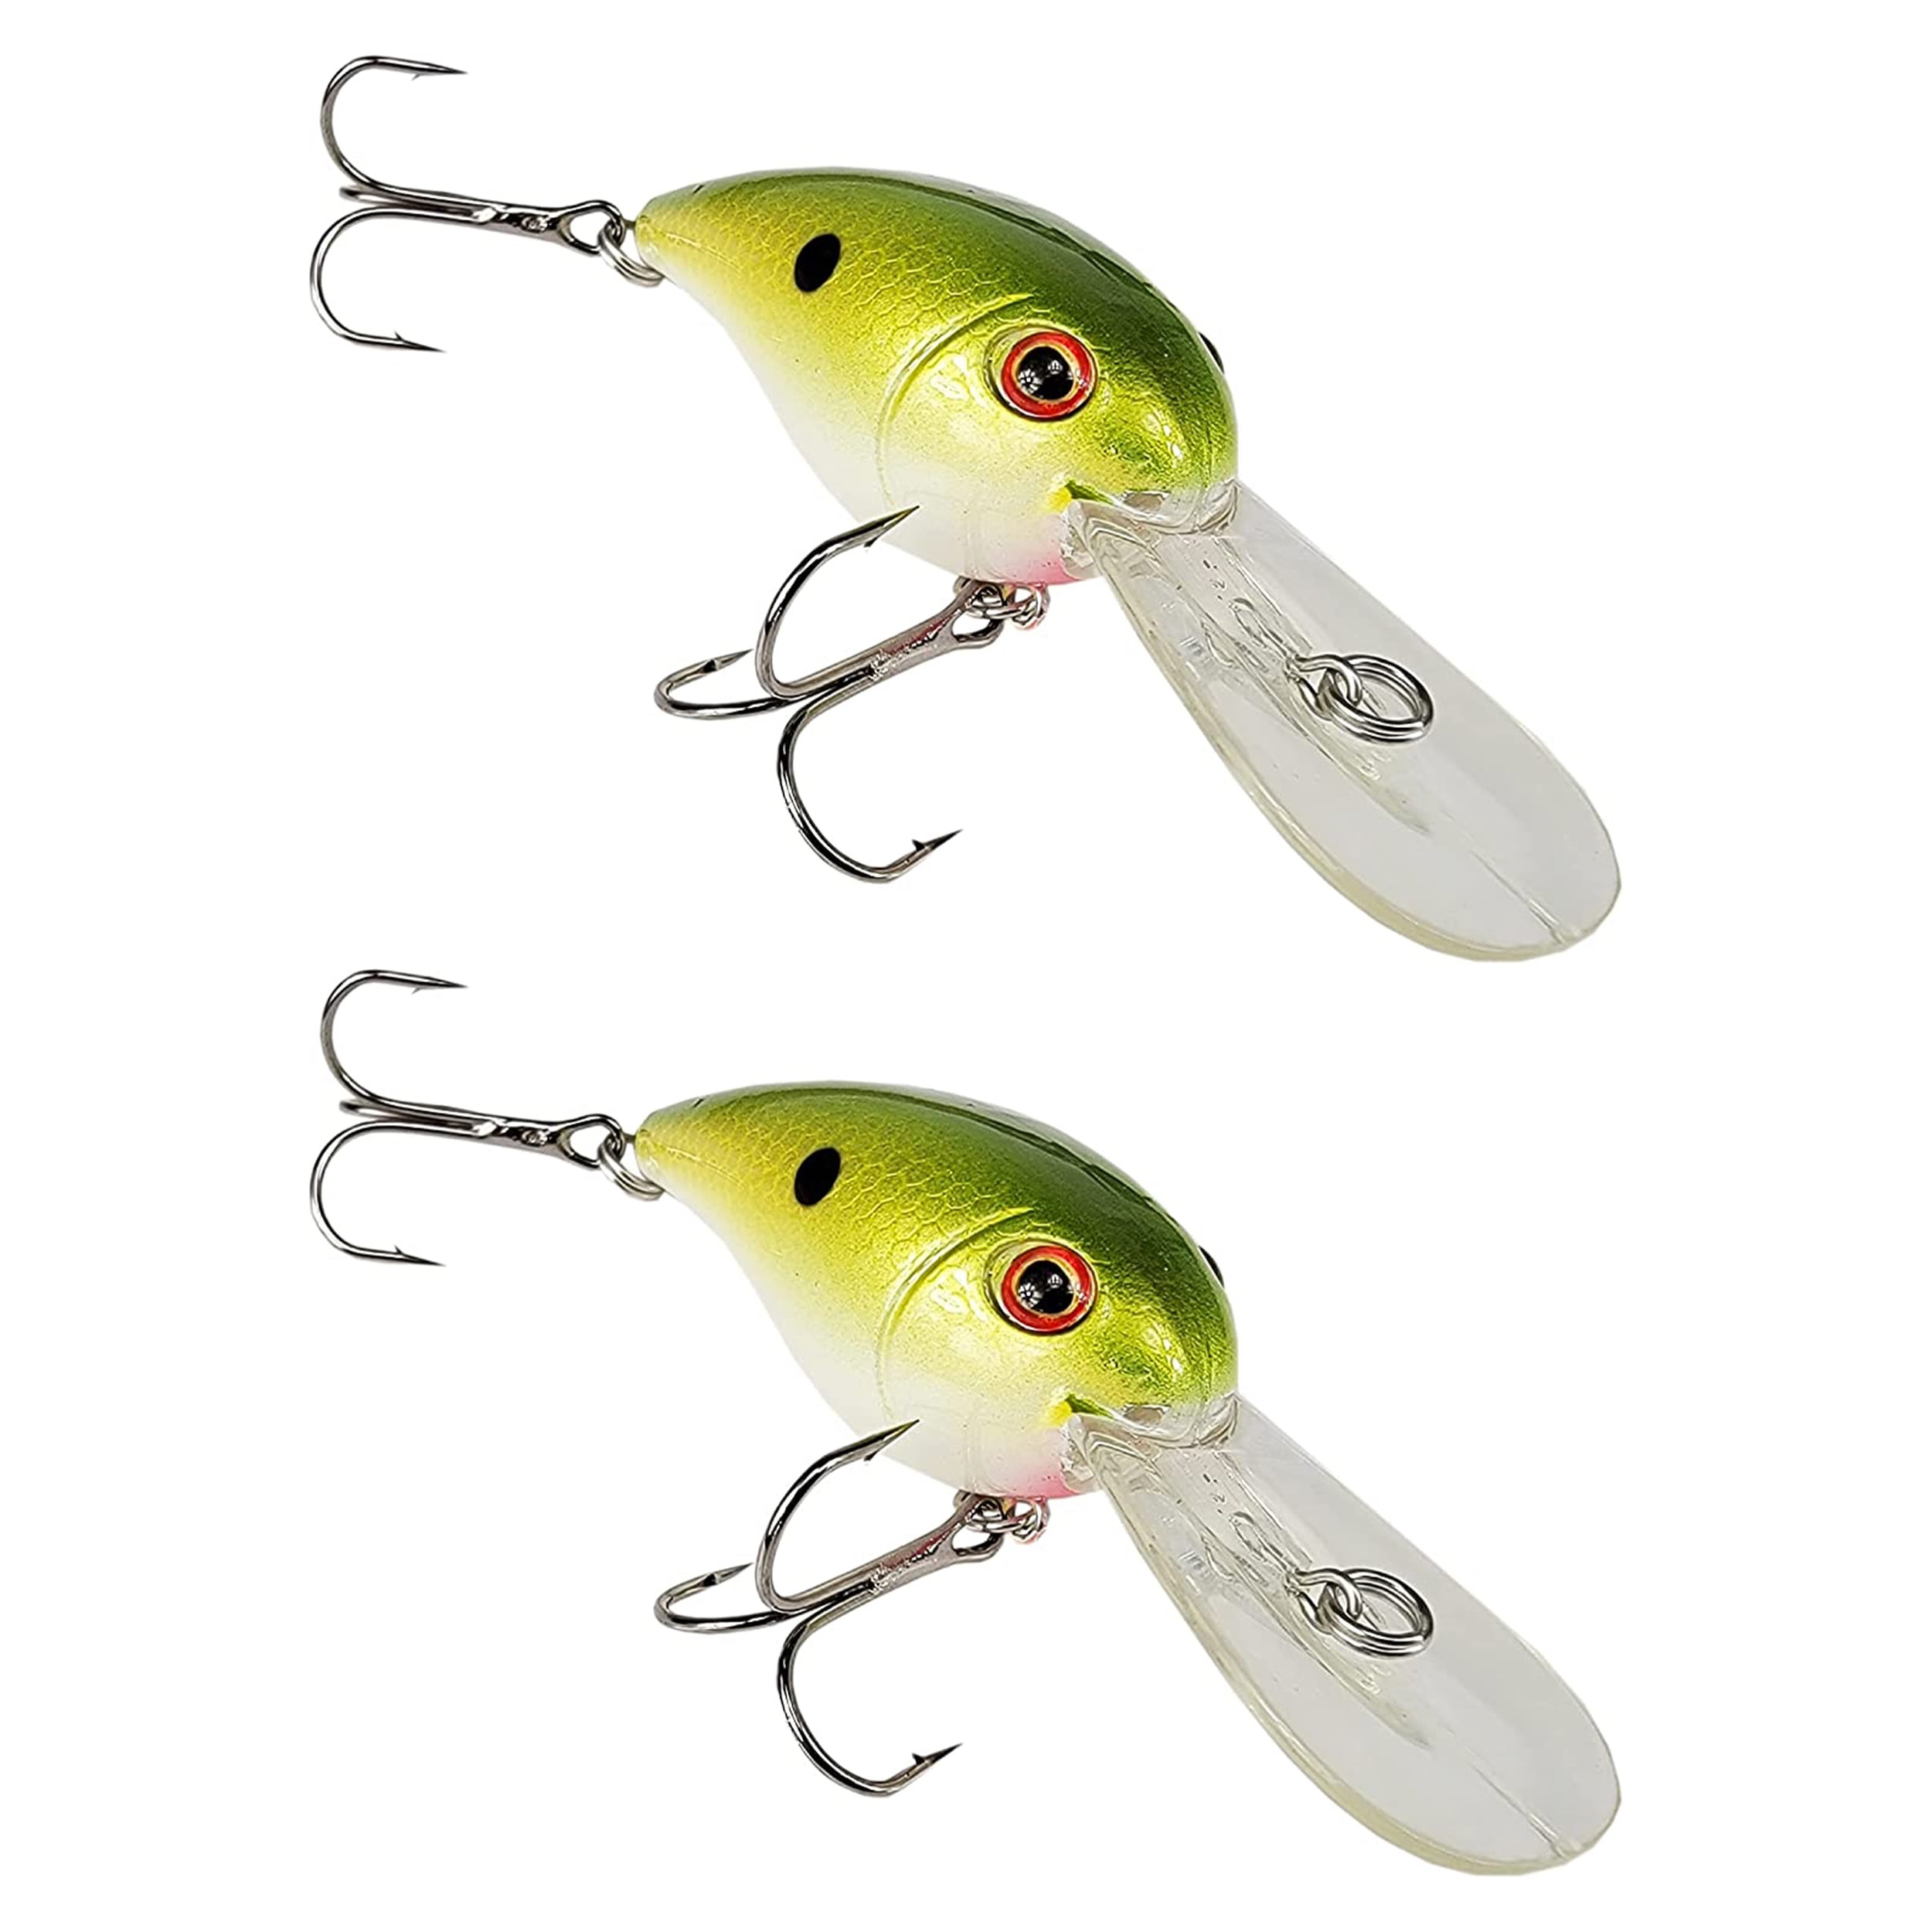 Tackle HD 2-Pack Crankhead Crankbait, Fishing Bait with 9 to 14 Feet Depth, Fishing  Lures for Freshwater or Saltwater, Hard Swimbaits for Bass, Crappie, or  Walleye, Tennessee Shad 